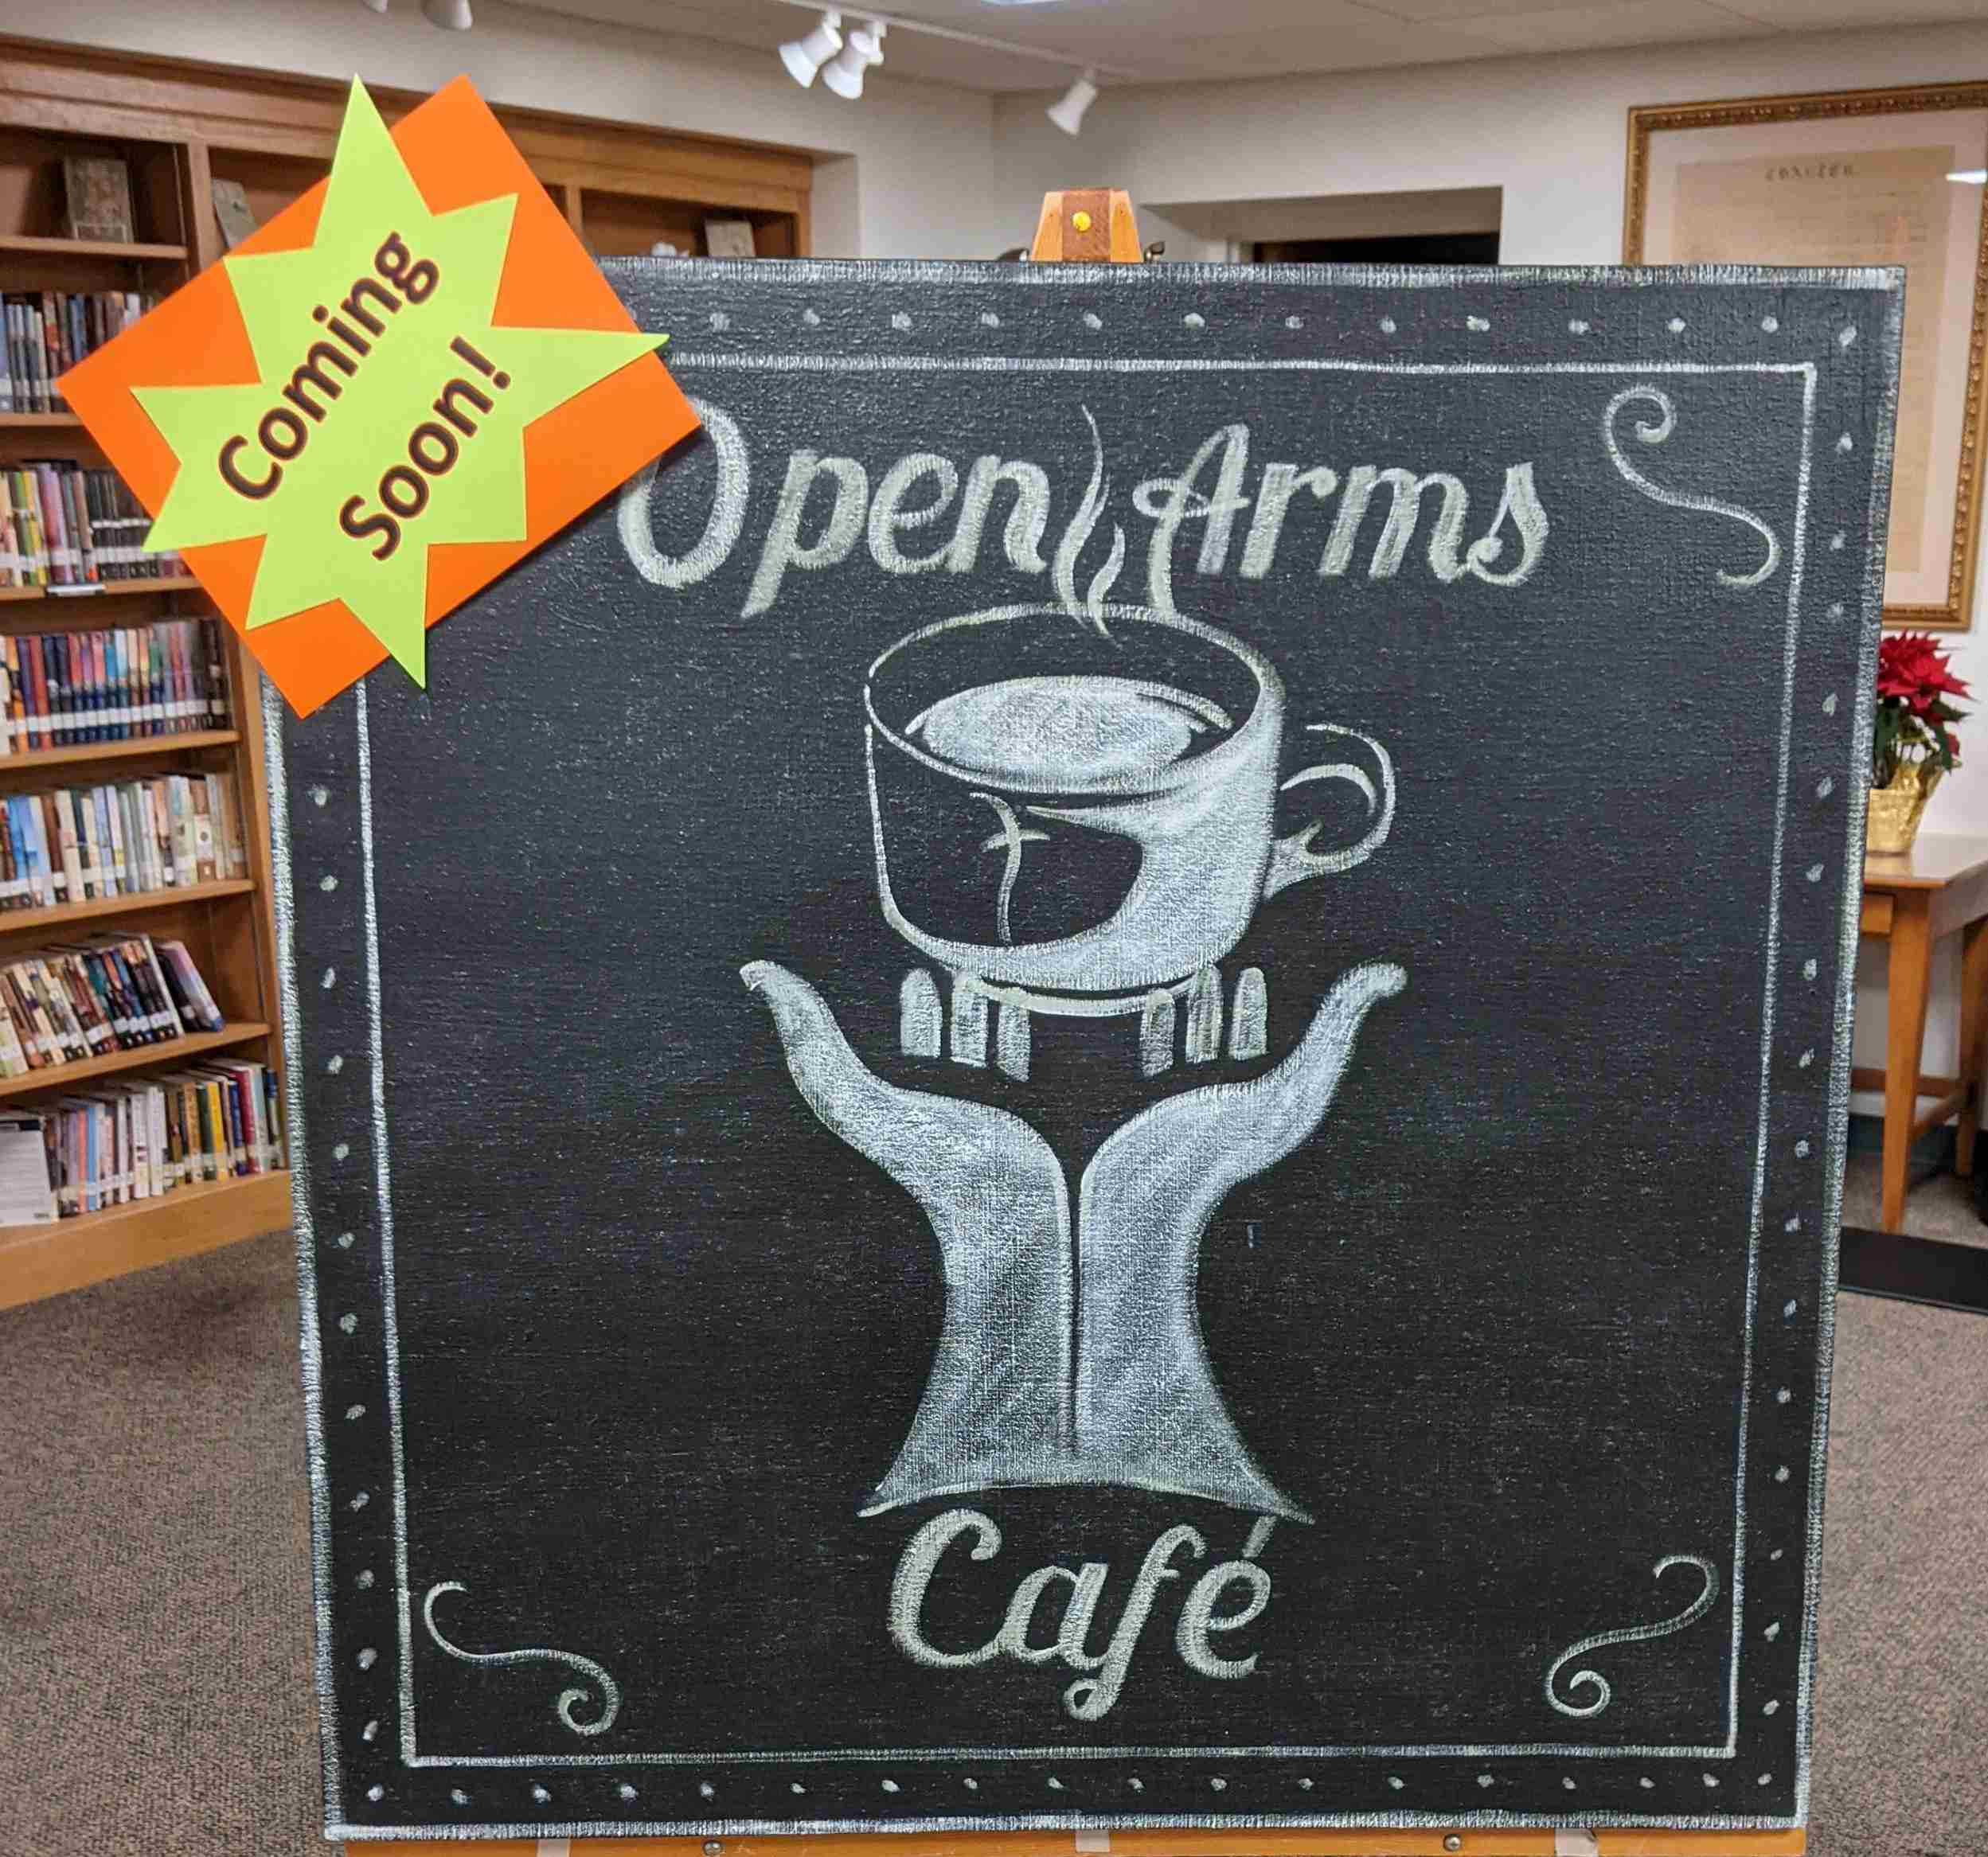 Coming soon: Open Arms Cafe